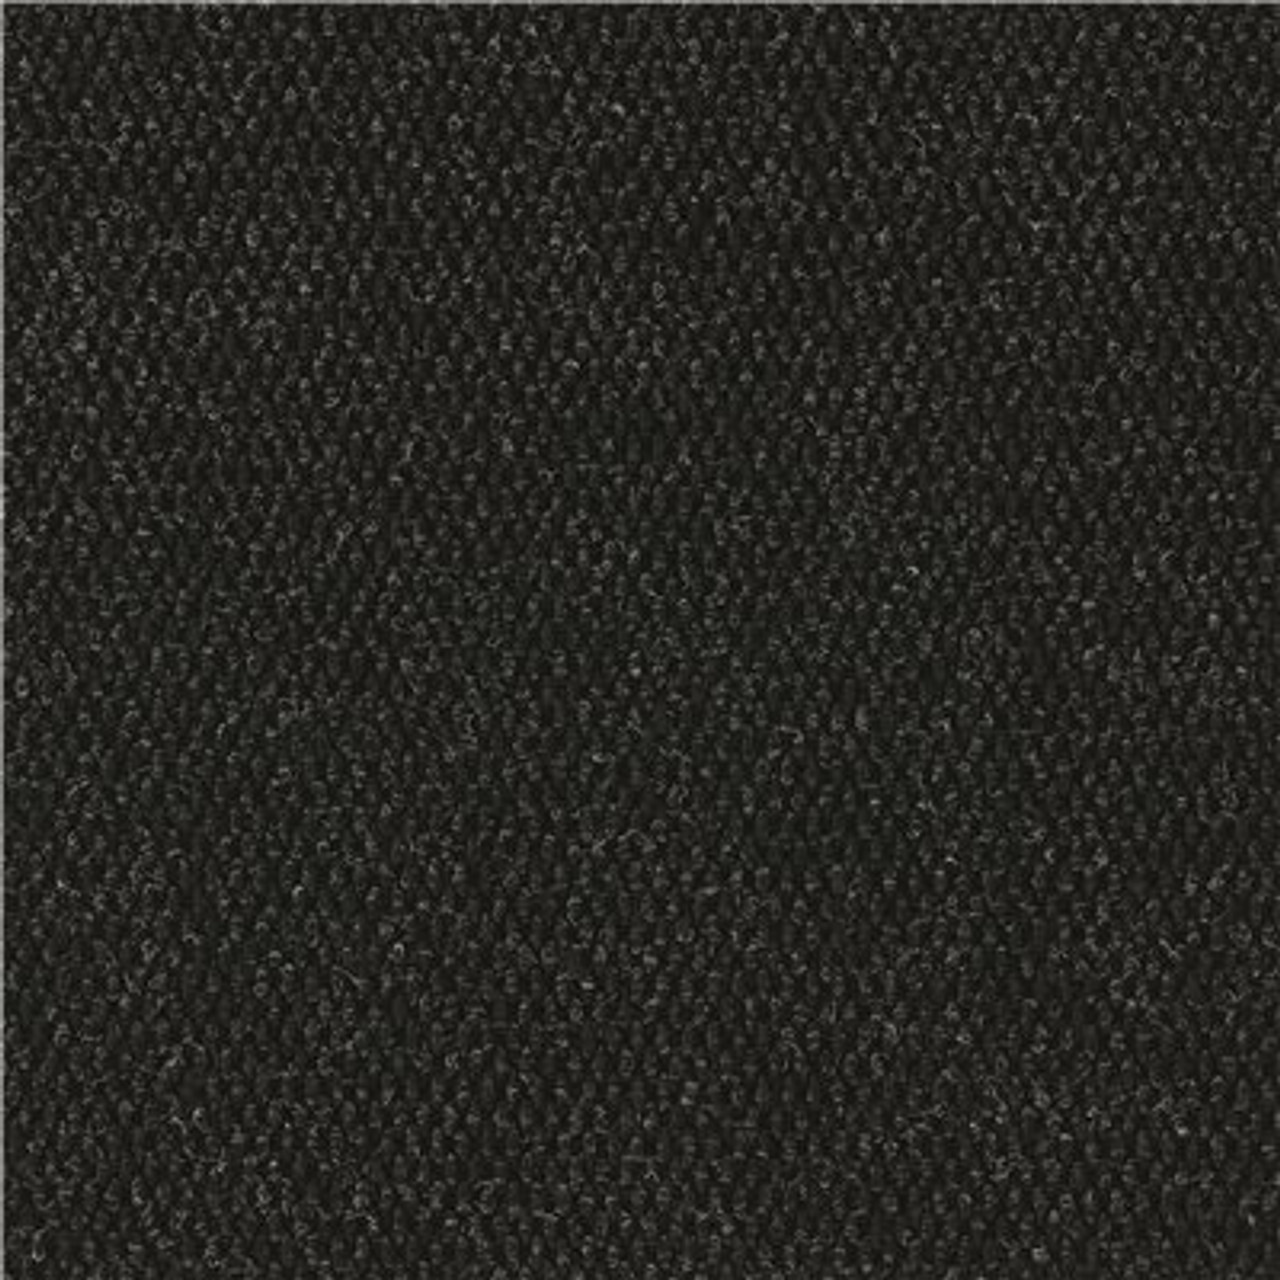 Foss Peel And Stick Modular Mat Hobnail Charcoal 18 In. X 18 In. Indoor/Outdoor Carpet Tile (10 Tiles/Case)